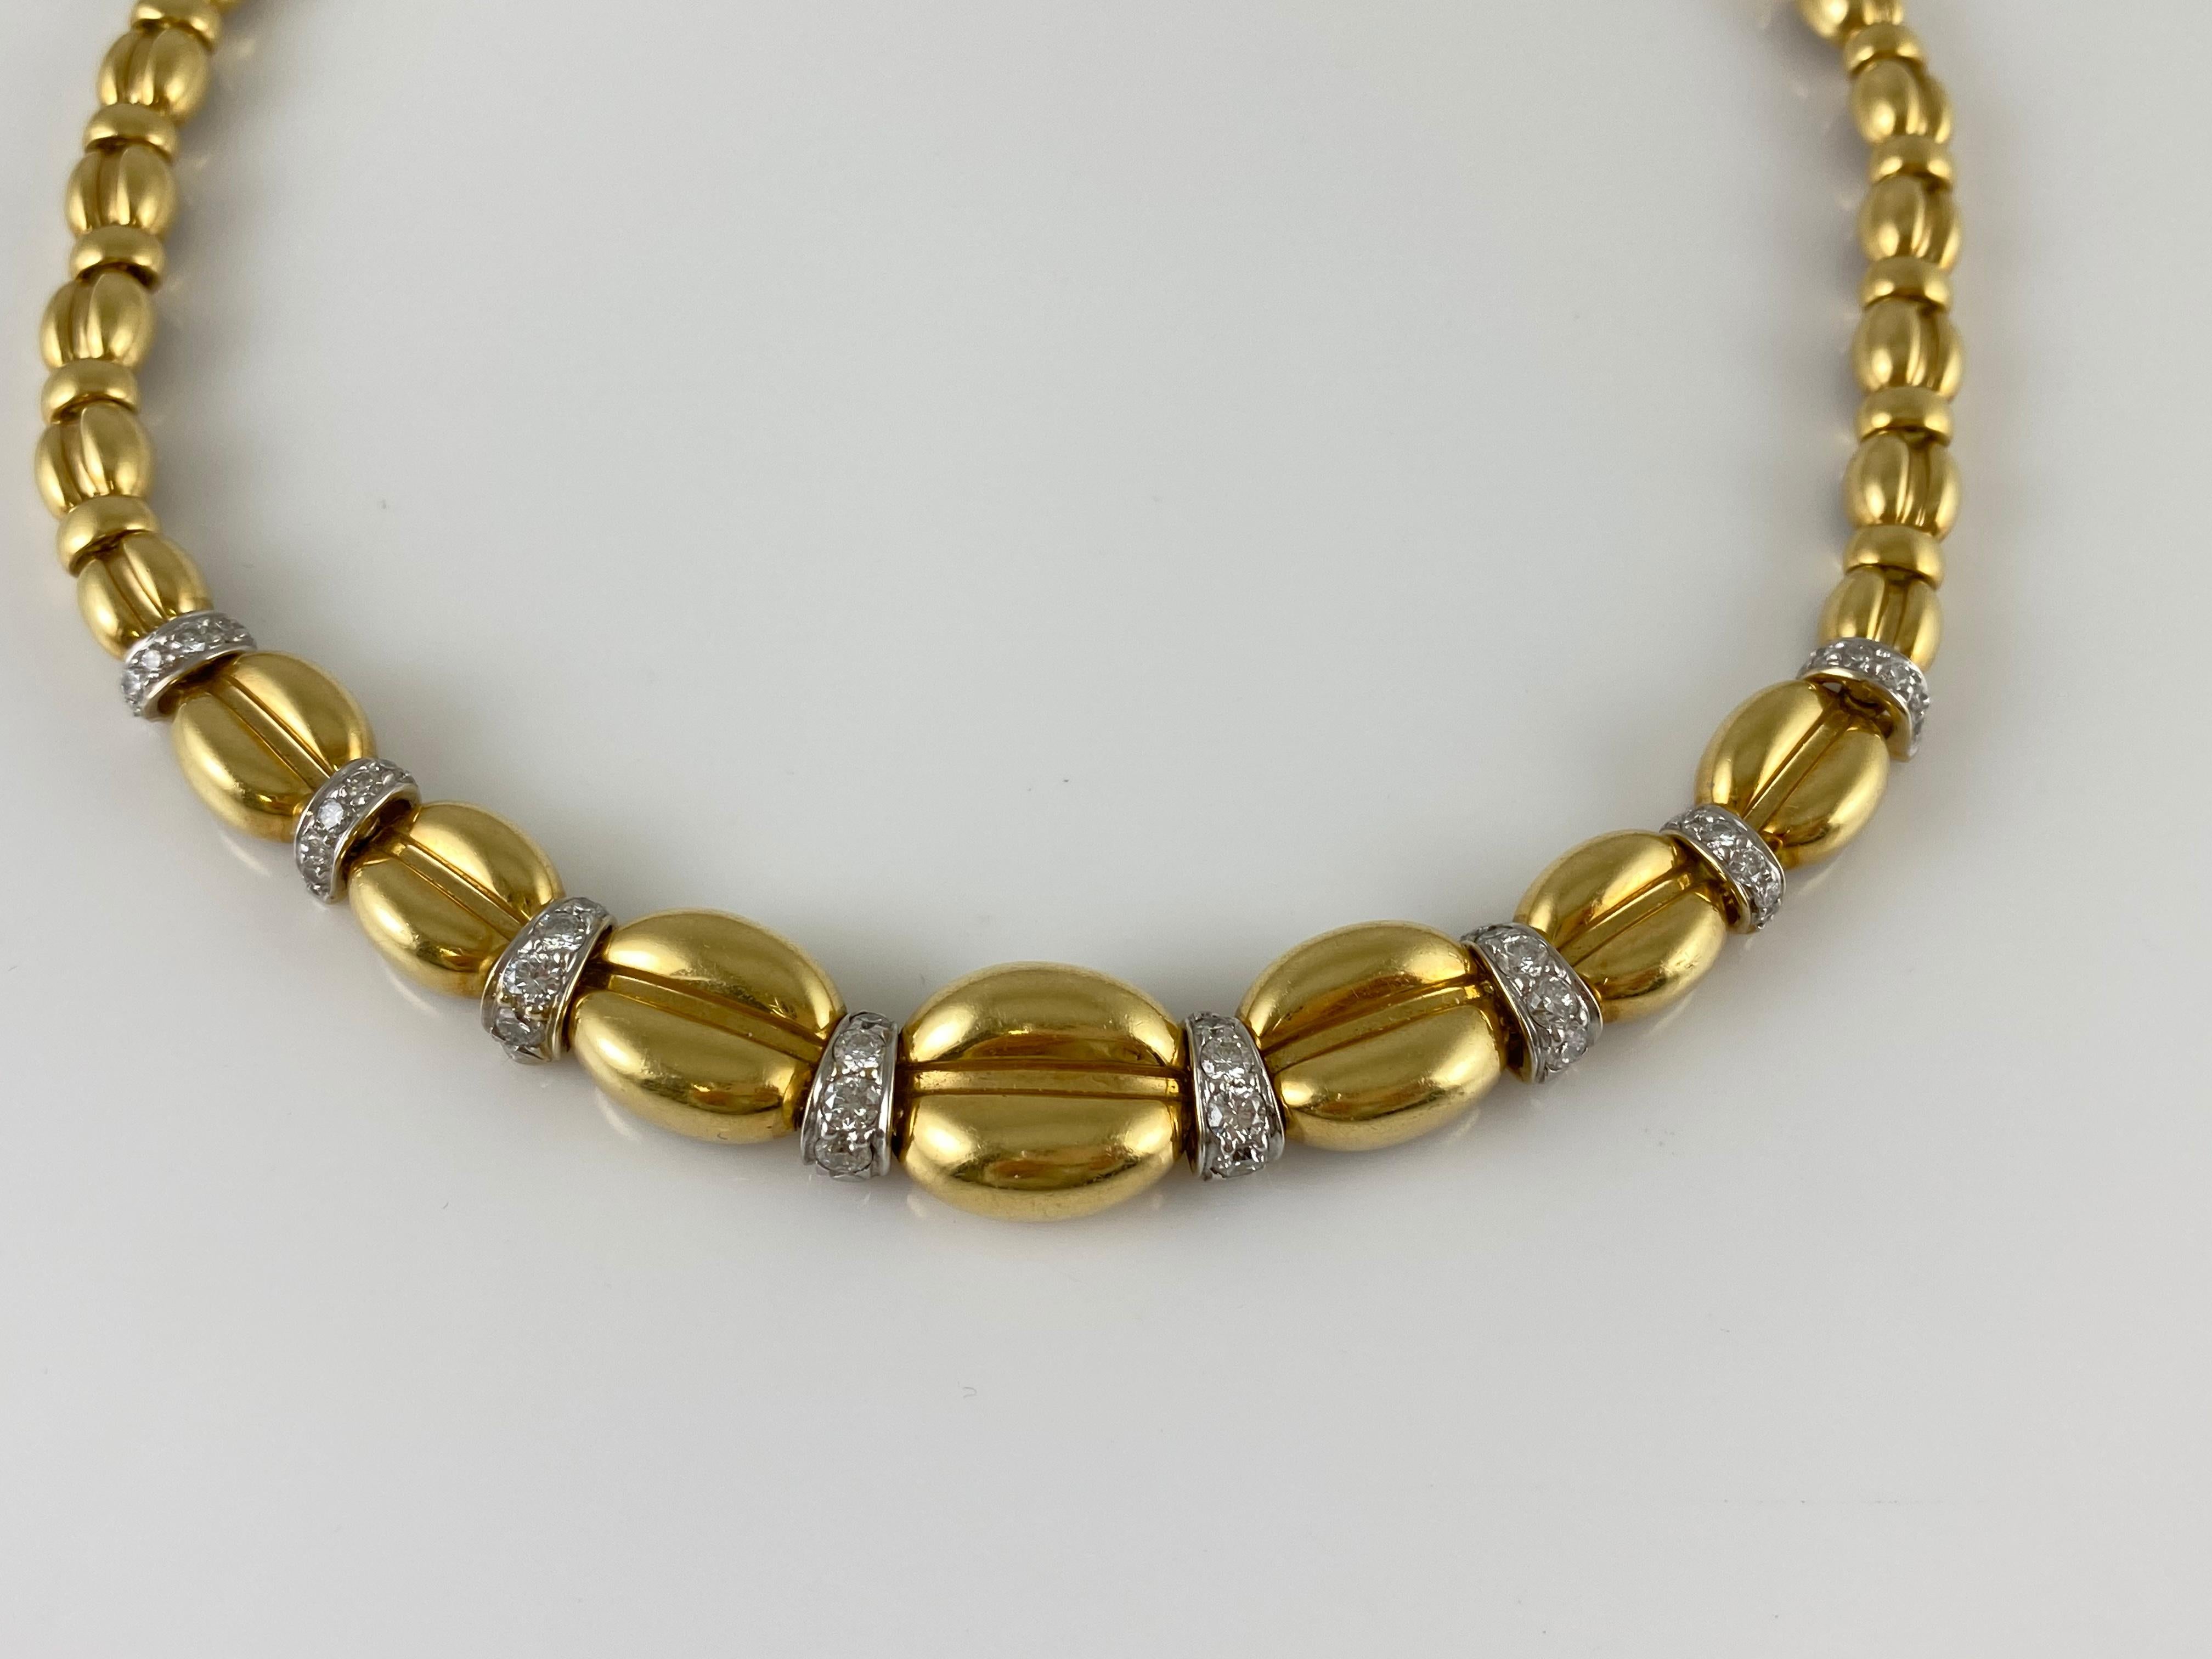 The necklace is finely crafted in 18k yellow gold wirh diamonds weighing approximately total of 2.00 carat.
The necklace weighing approc=ximately total of 50.00 dwt.
The length: 16.50inch